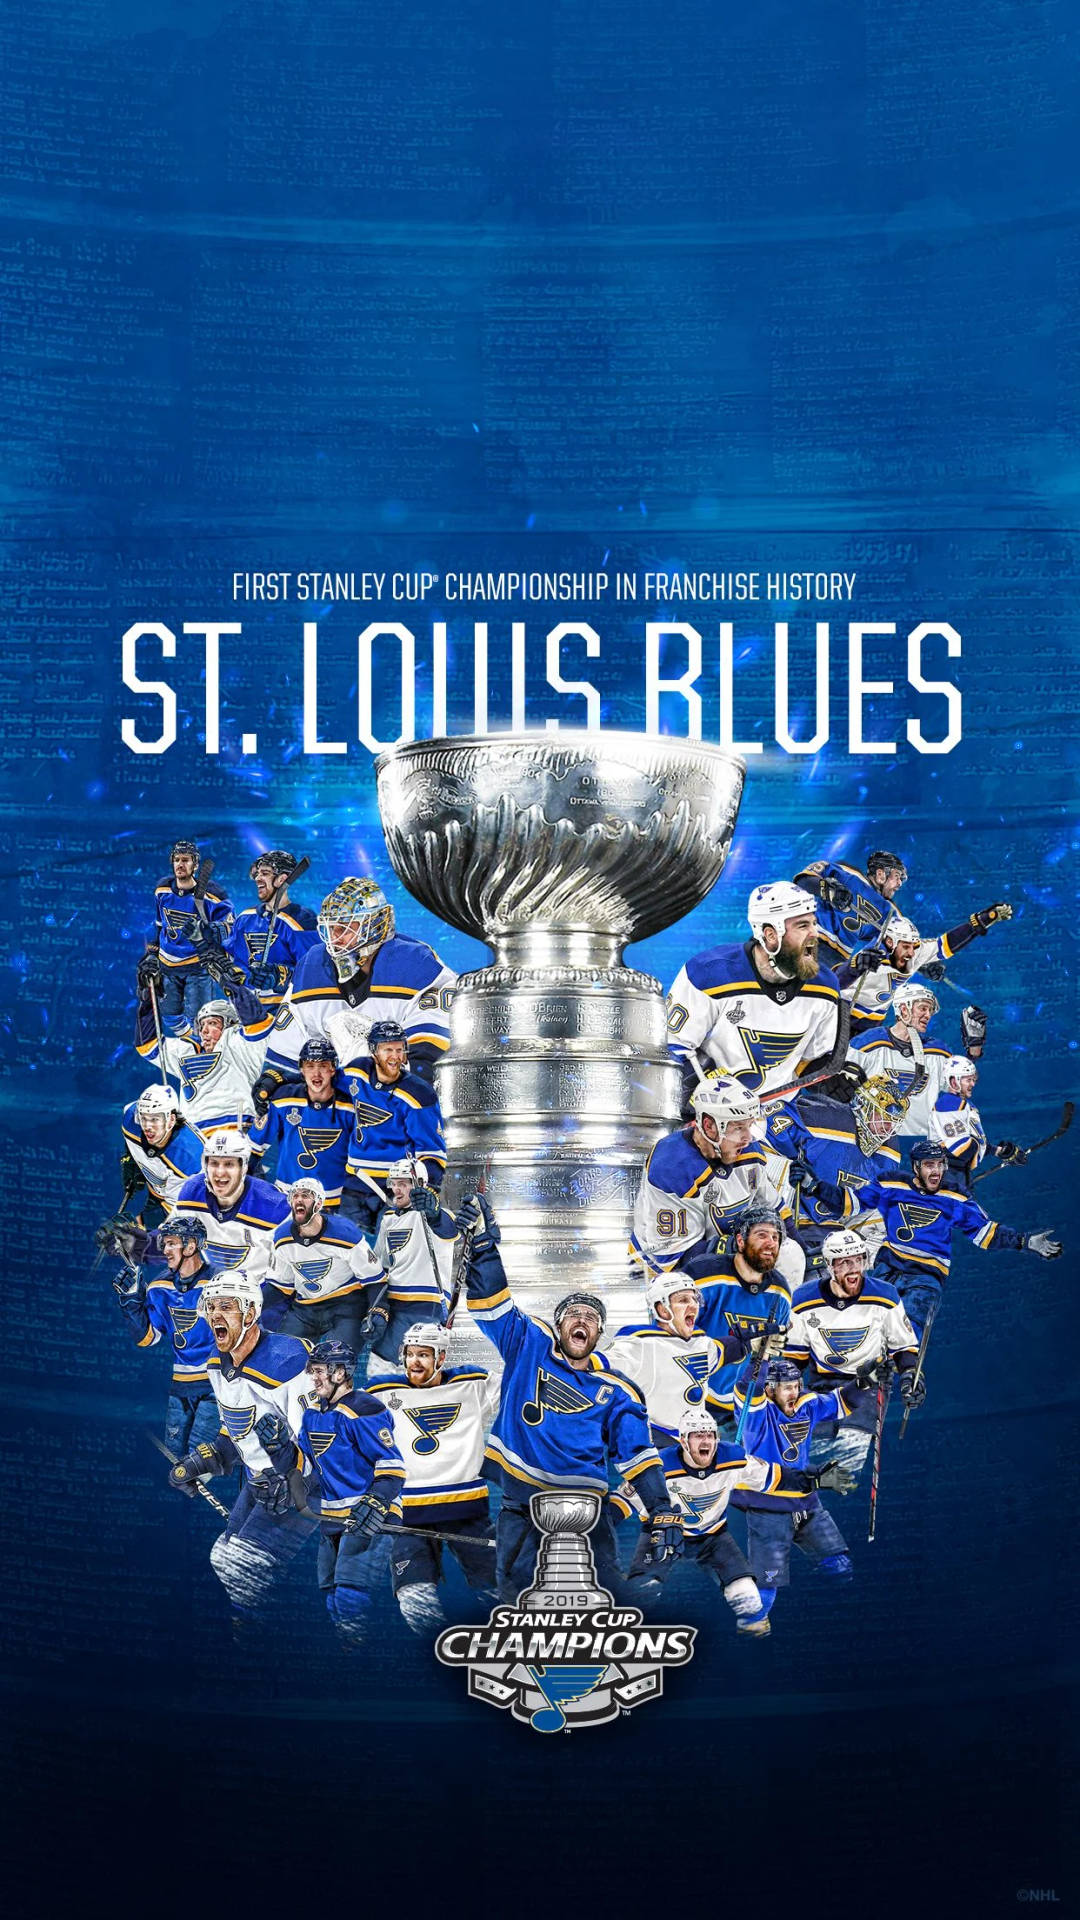 Stanley Cup Champion St. Louis Blues Celebrating Victory